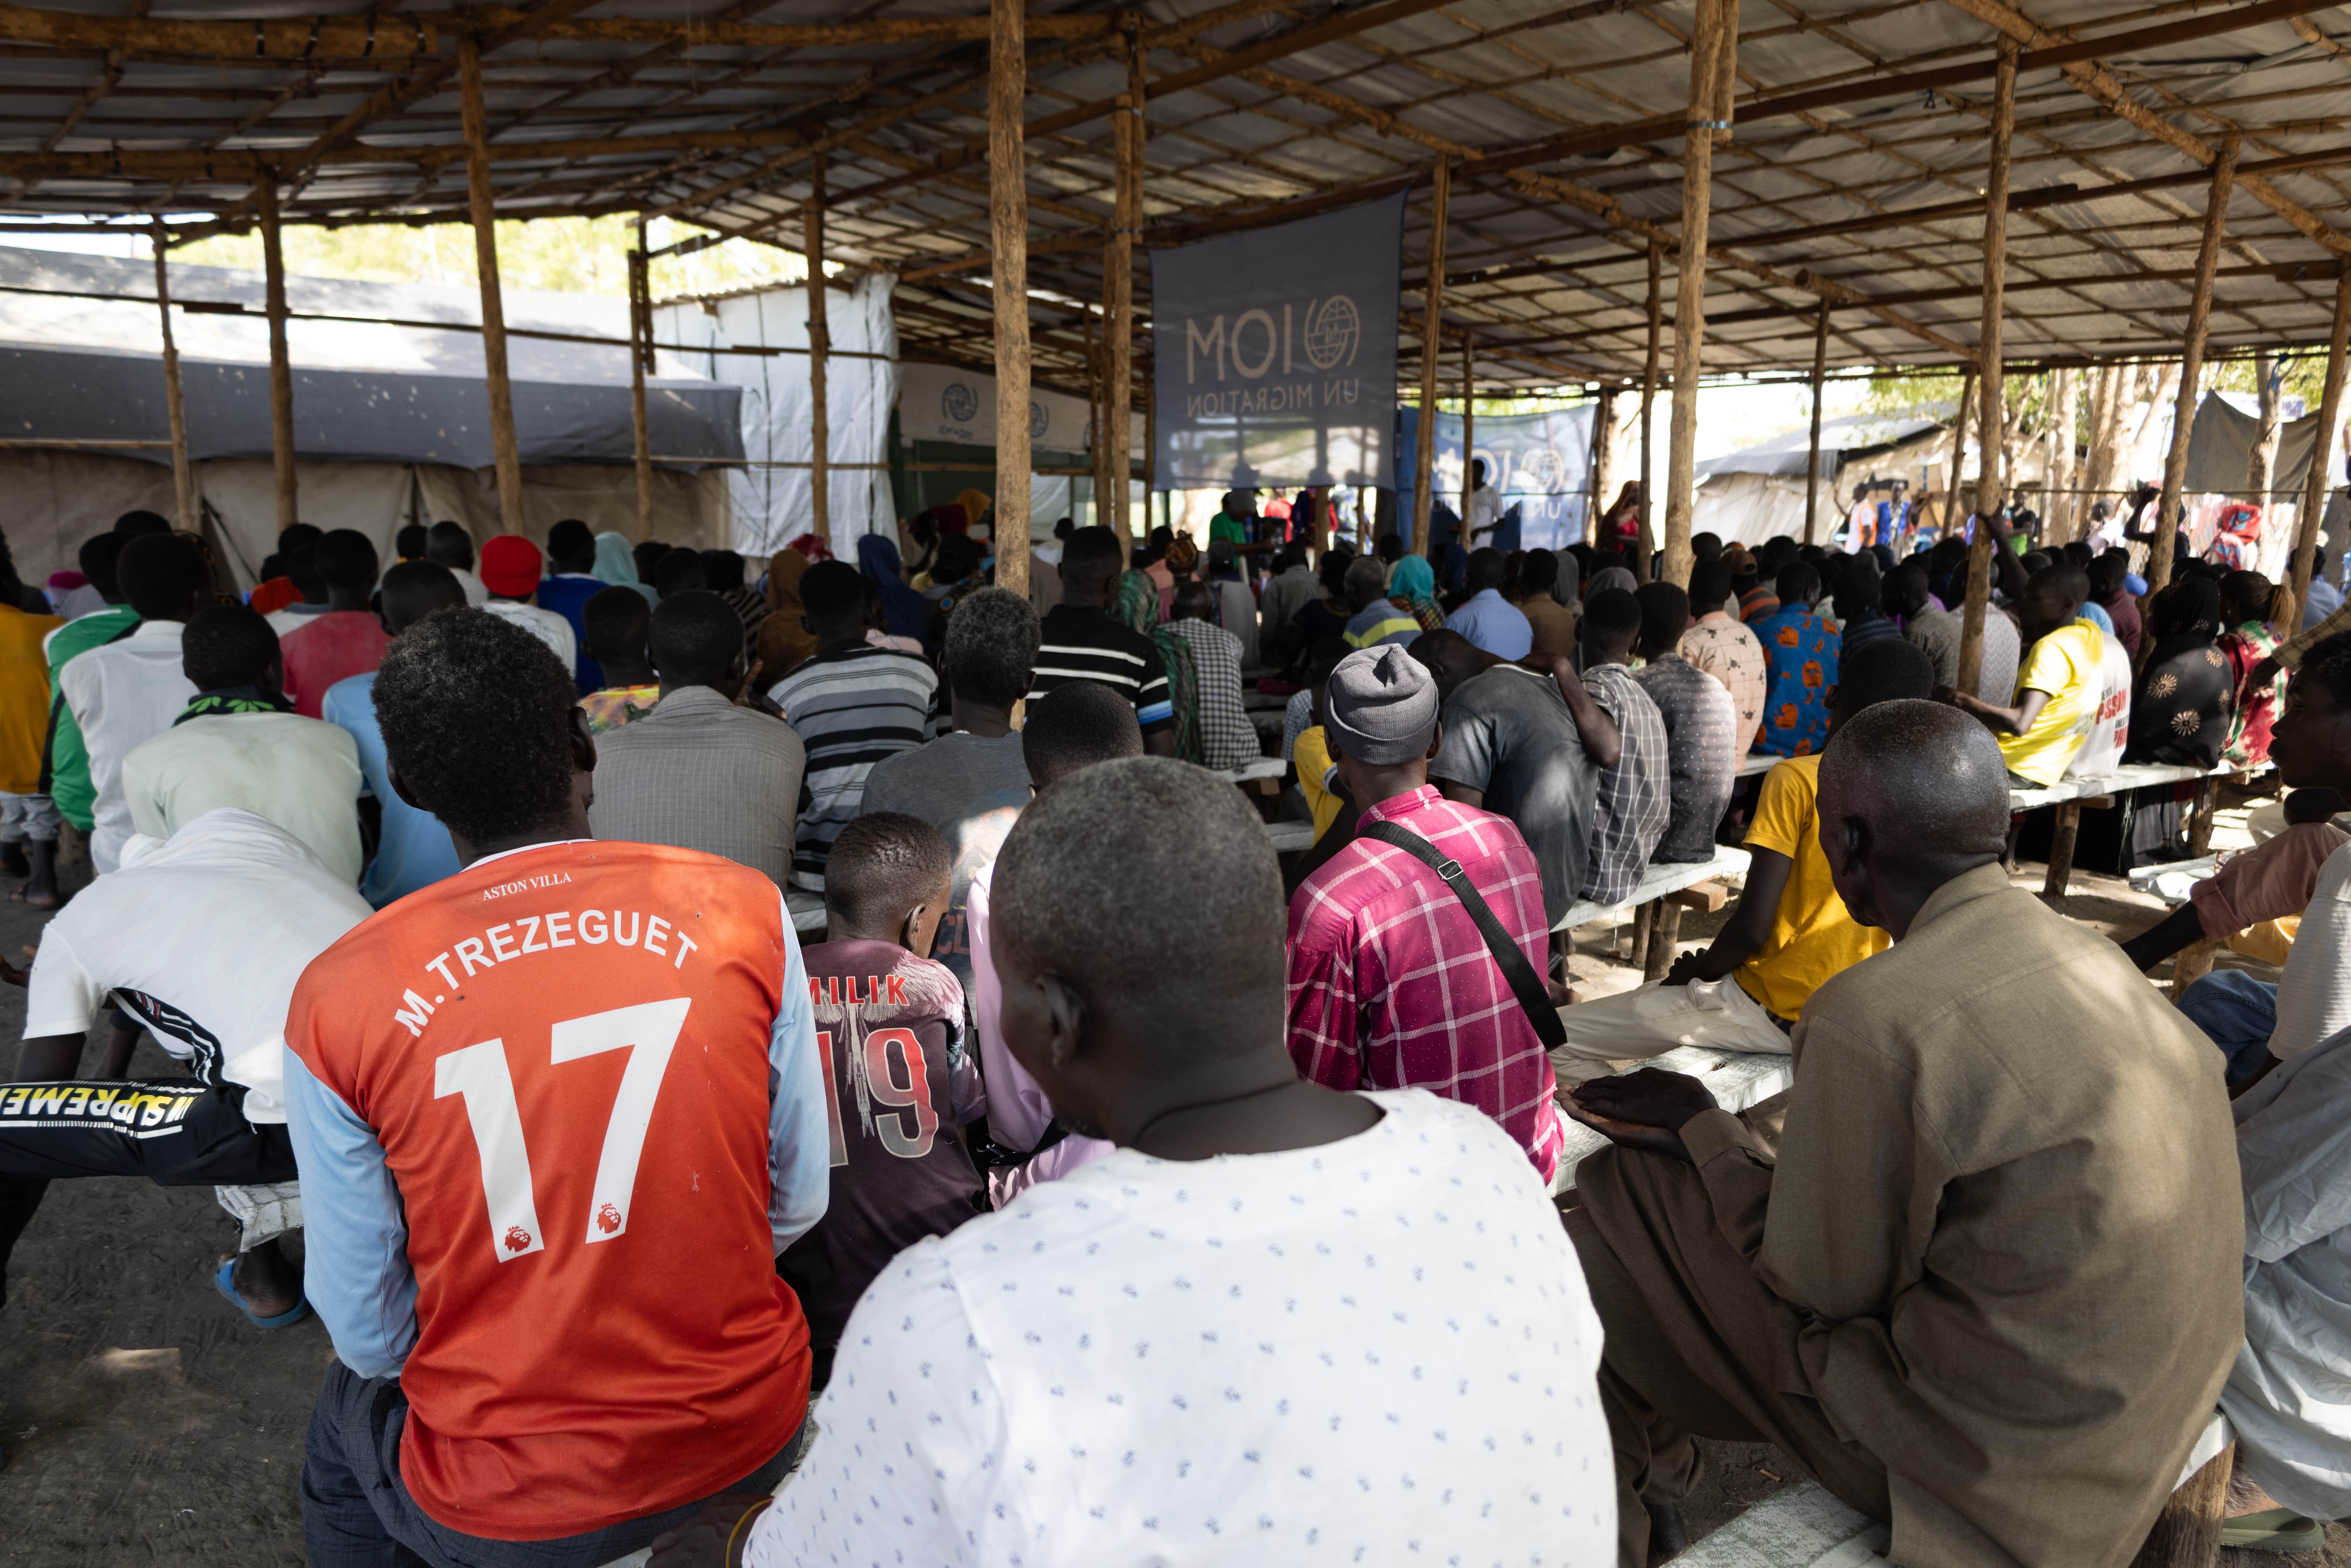 Sudan War & South Sudan Refugees: Hundreds of returnees from Sudan are waiting at IOM registration point after their arrival during the night in Bulukat transit centre.